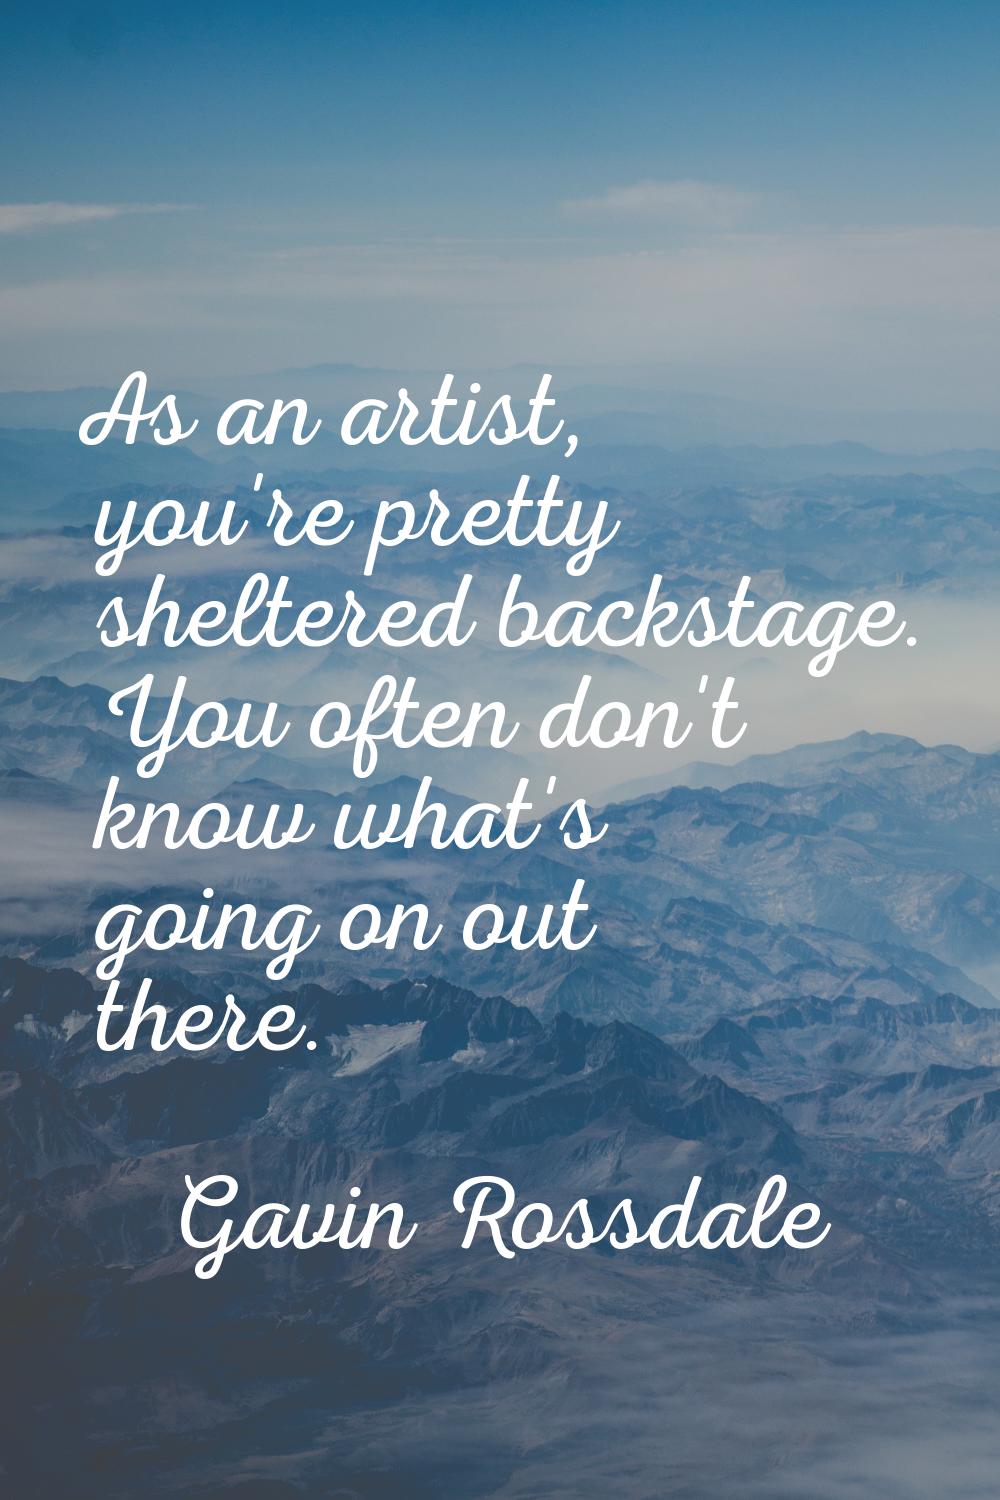 As an artist, you're pretty sheltered backstage. You often don't know what's going on out there.